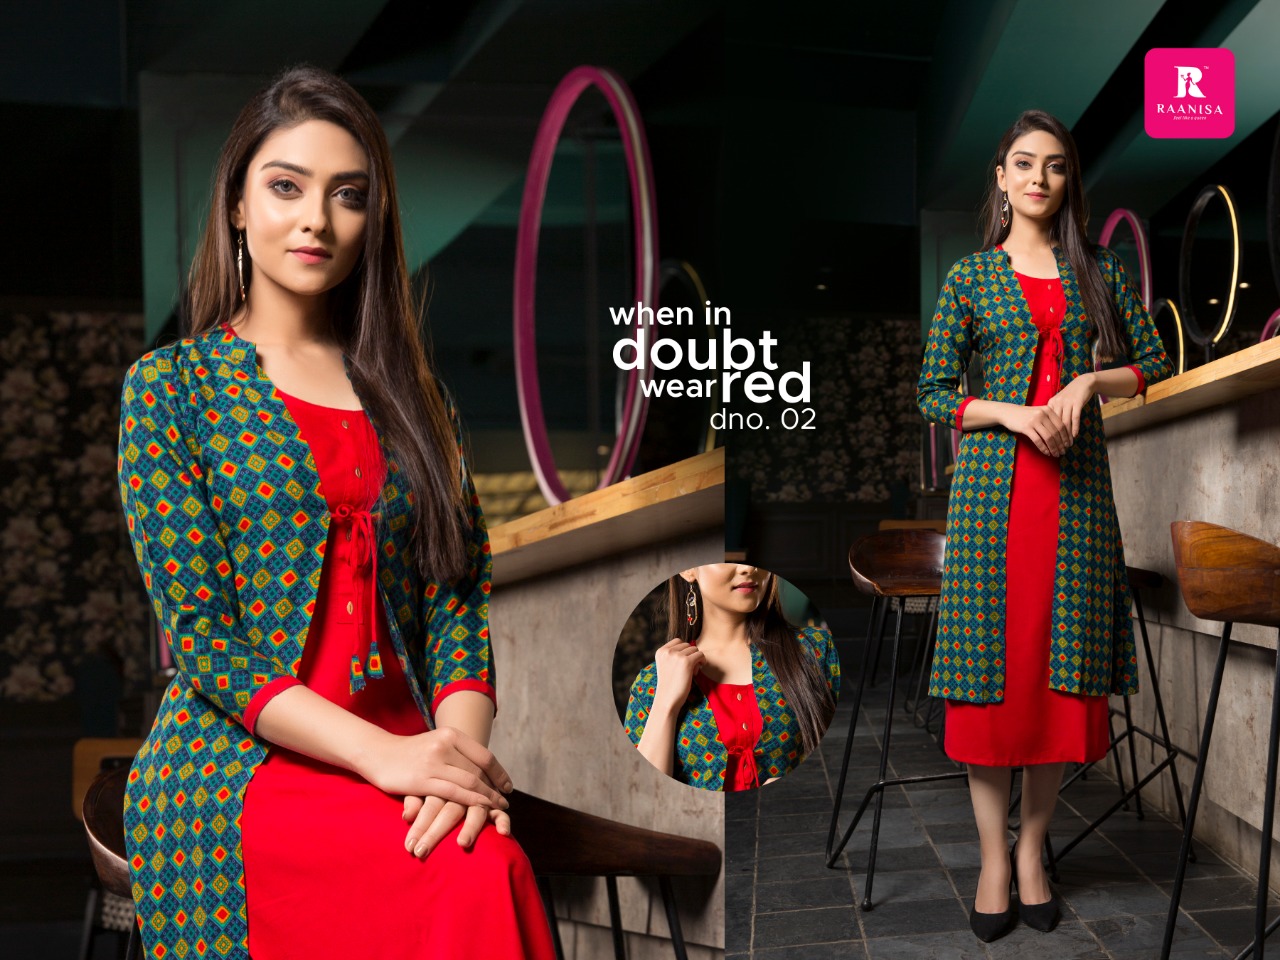 Swarupa By Raanisa 01 To 08 Series Beautiful Stylish Designer Printed And Embroidered Party Wear Occasional Wear Pure Rayon Printed Kurtis At Wholesale Price